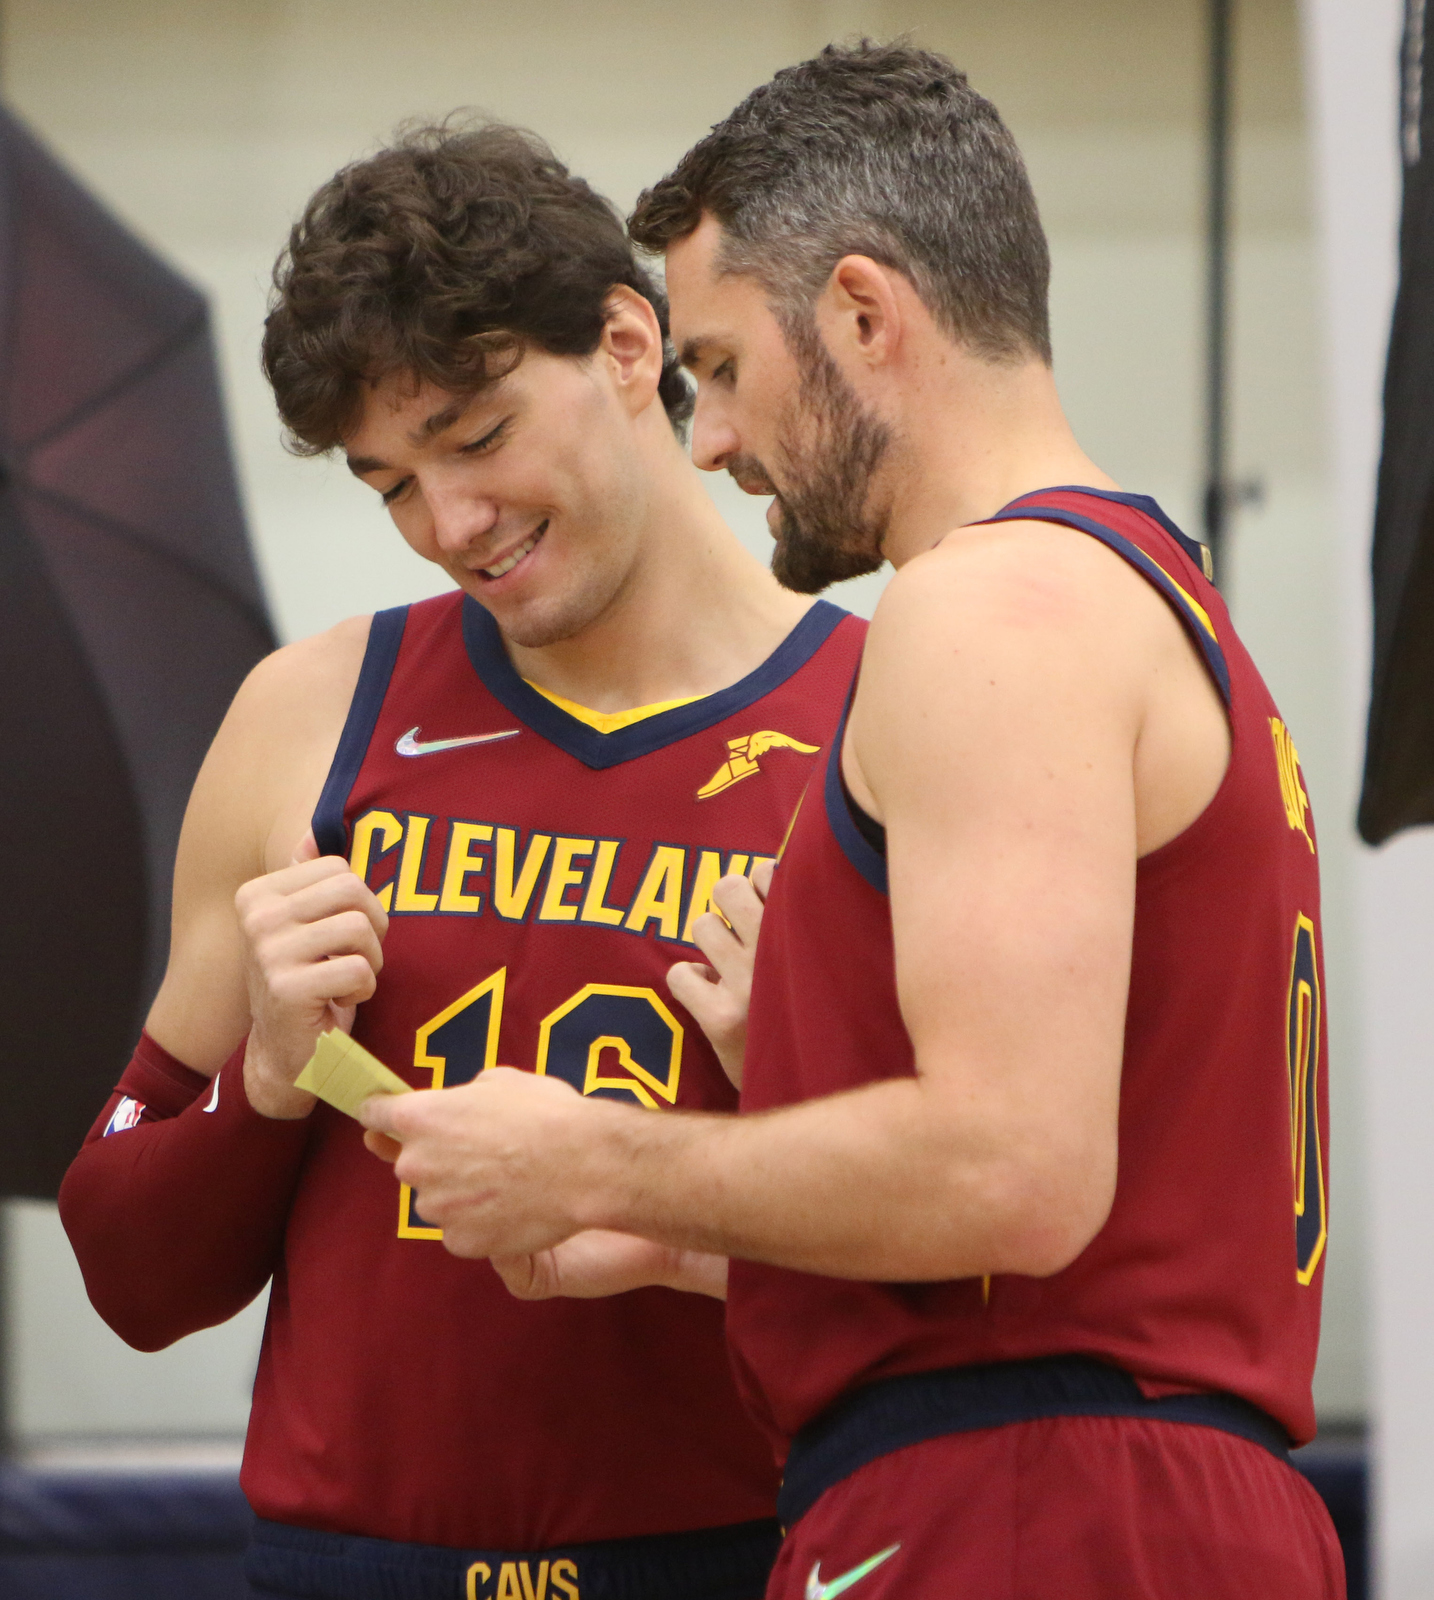 An Inside Look at Cavs Media Day, Presented by Cleveland Clinic